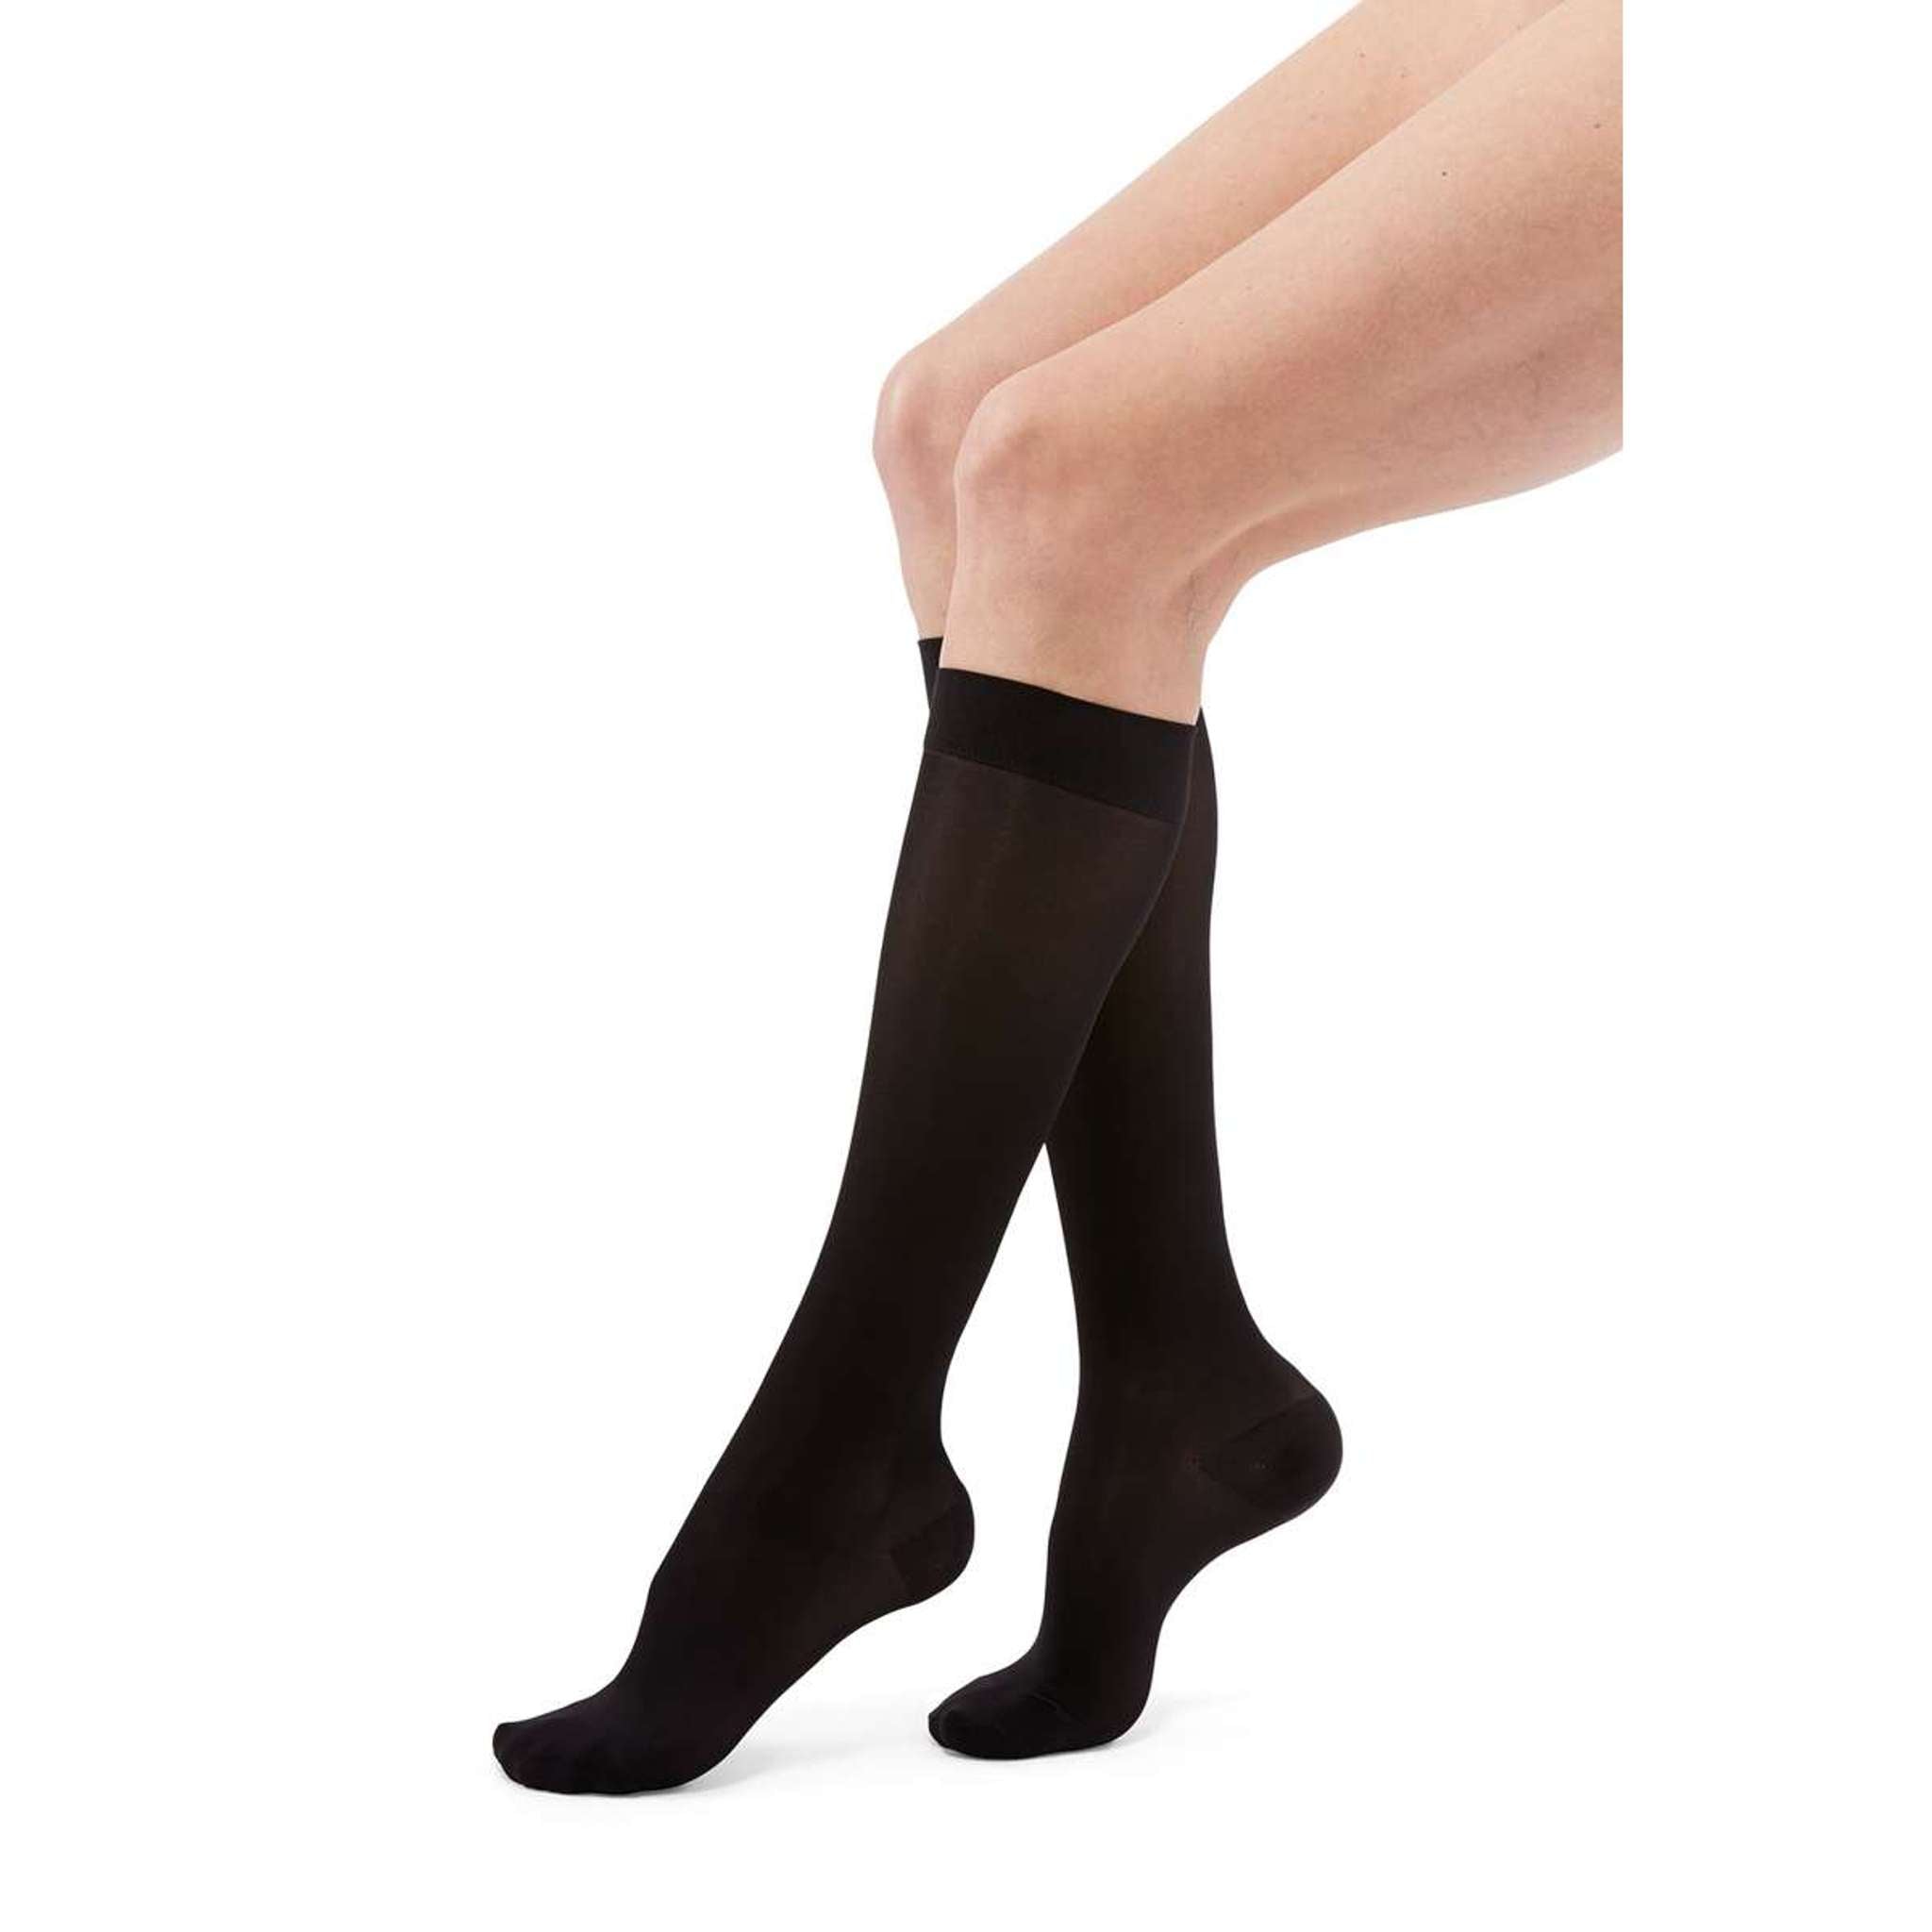 duomed transparent 20-30 mmHg Calf High Closed Toe Compression Stockings